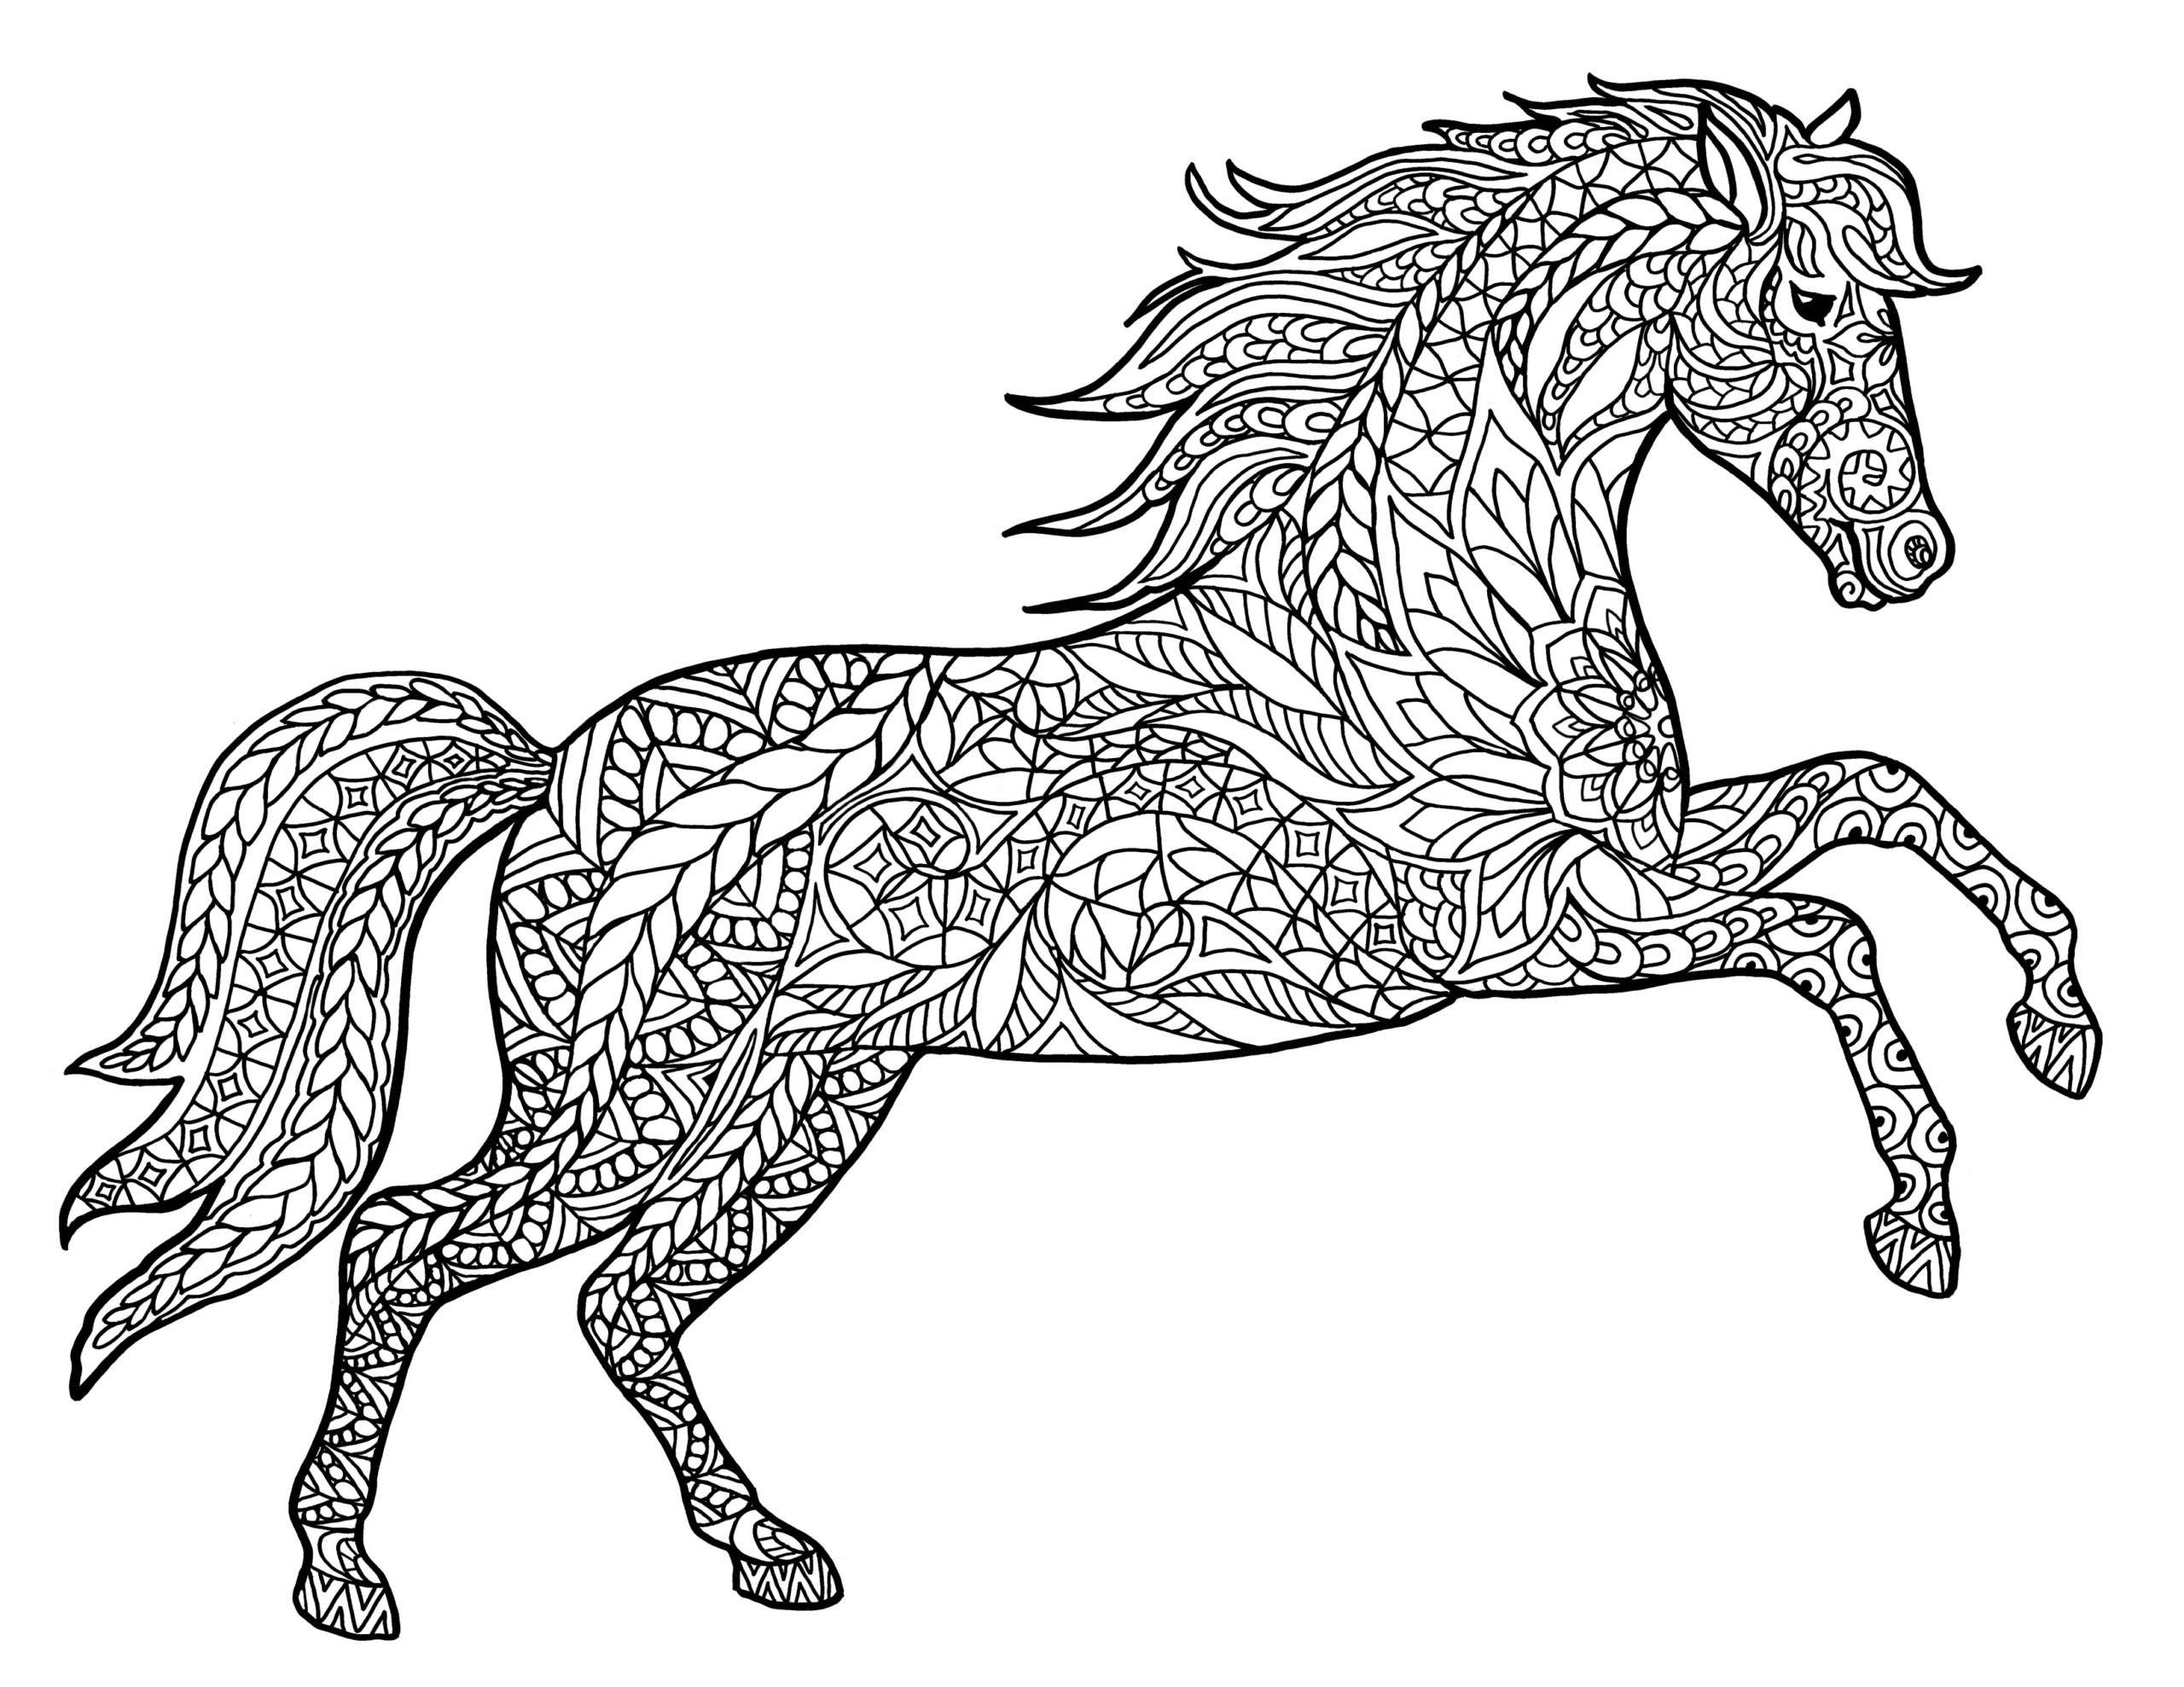 Animal Coloring Pages For Adults Free Printable